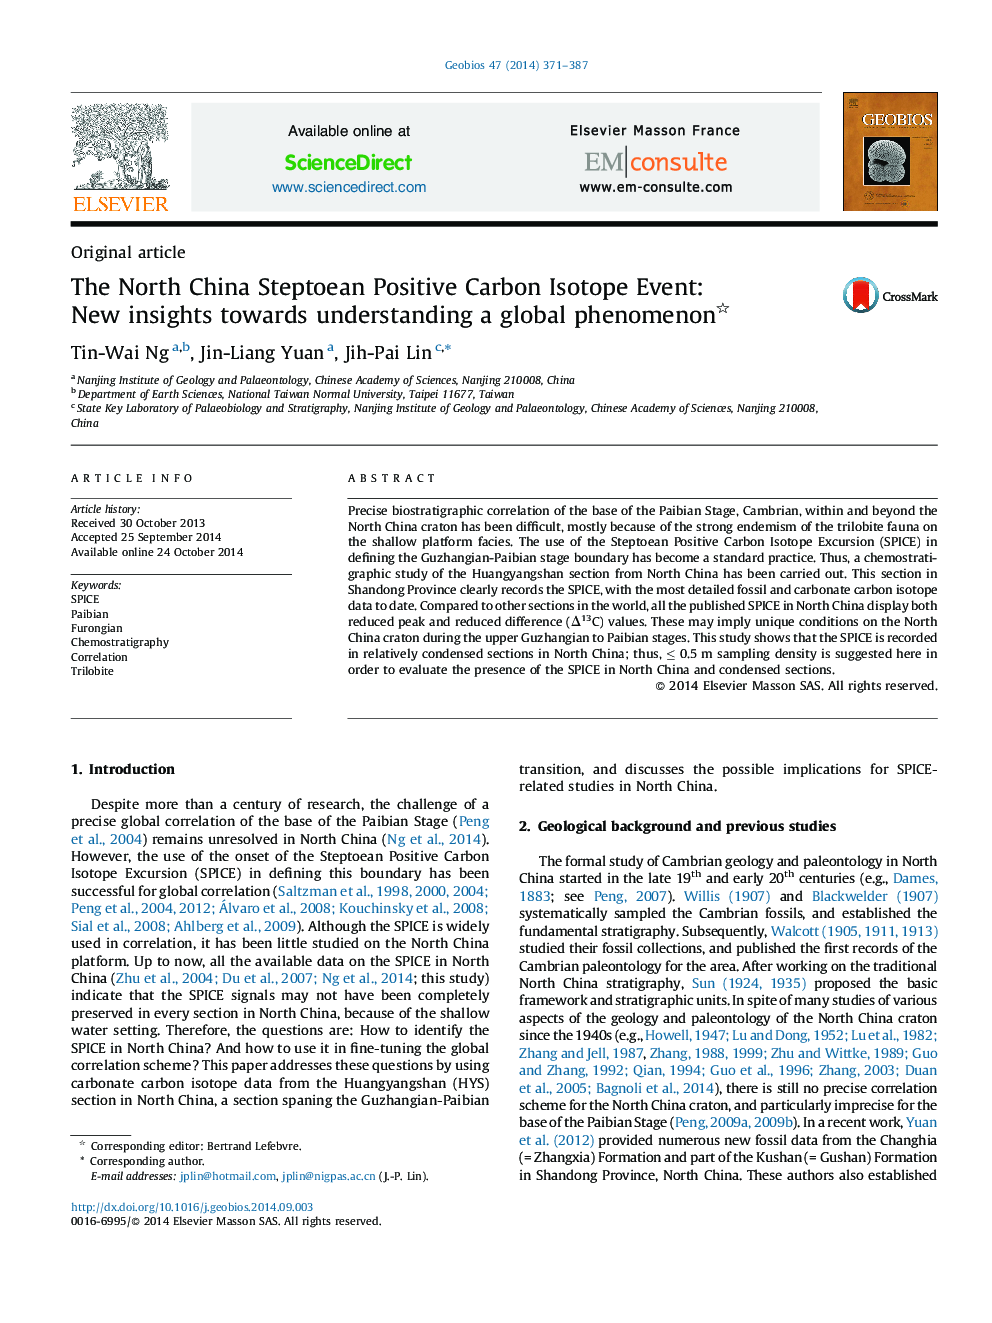 The North China Steptoean Positive Carbon Isotope Event: New insights towards understanding a global phenomenon 